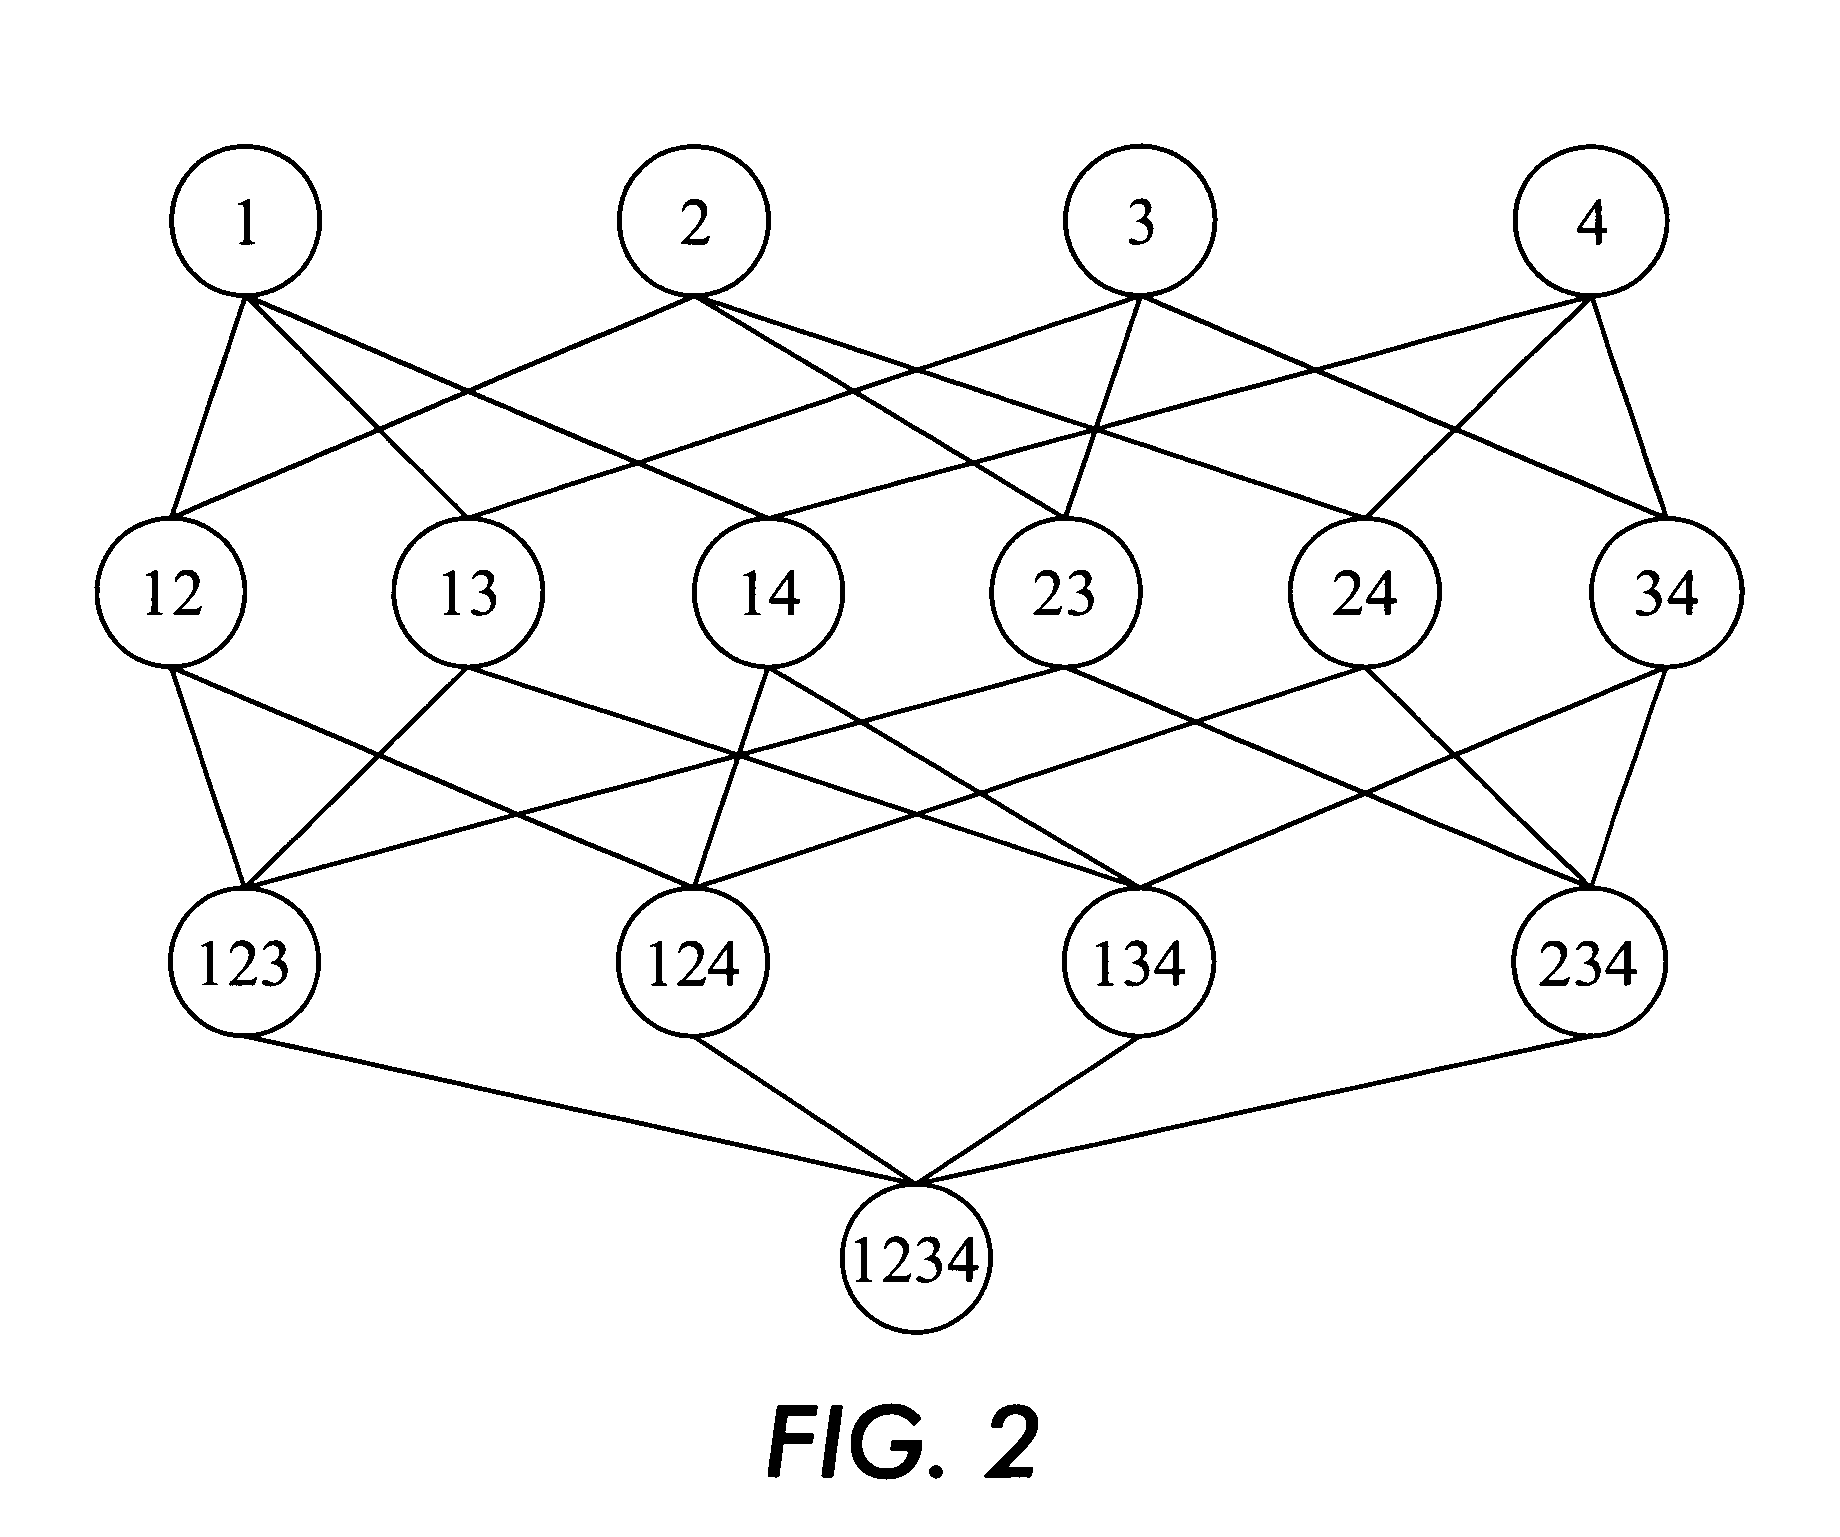 Method for multi-class, multi-label categorization using probabilistic hierarchical modeling